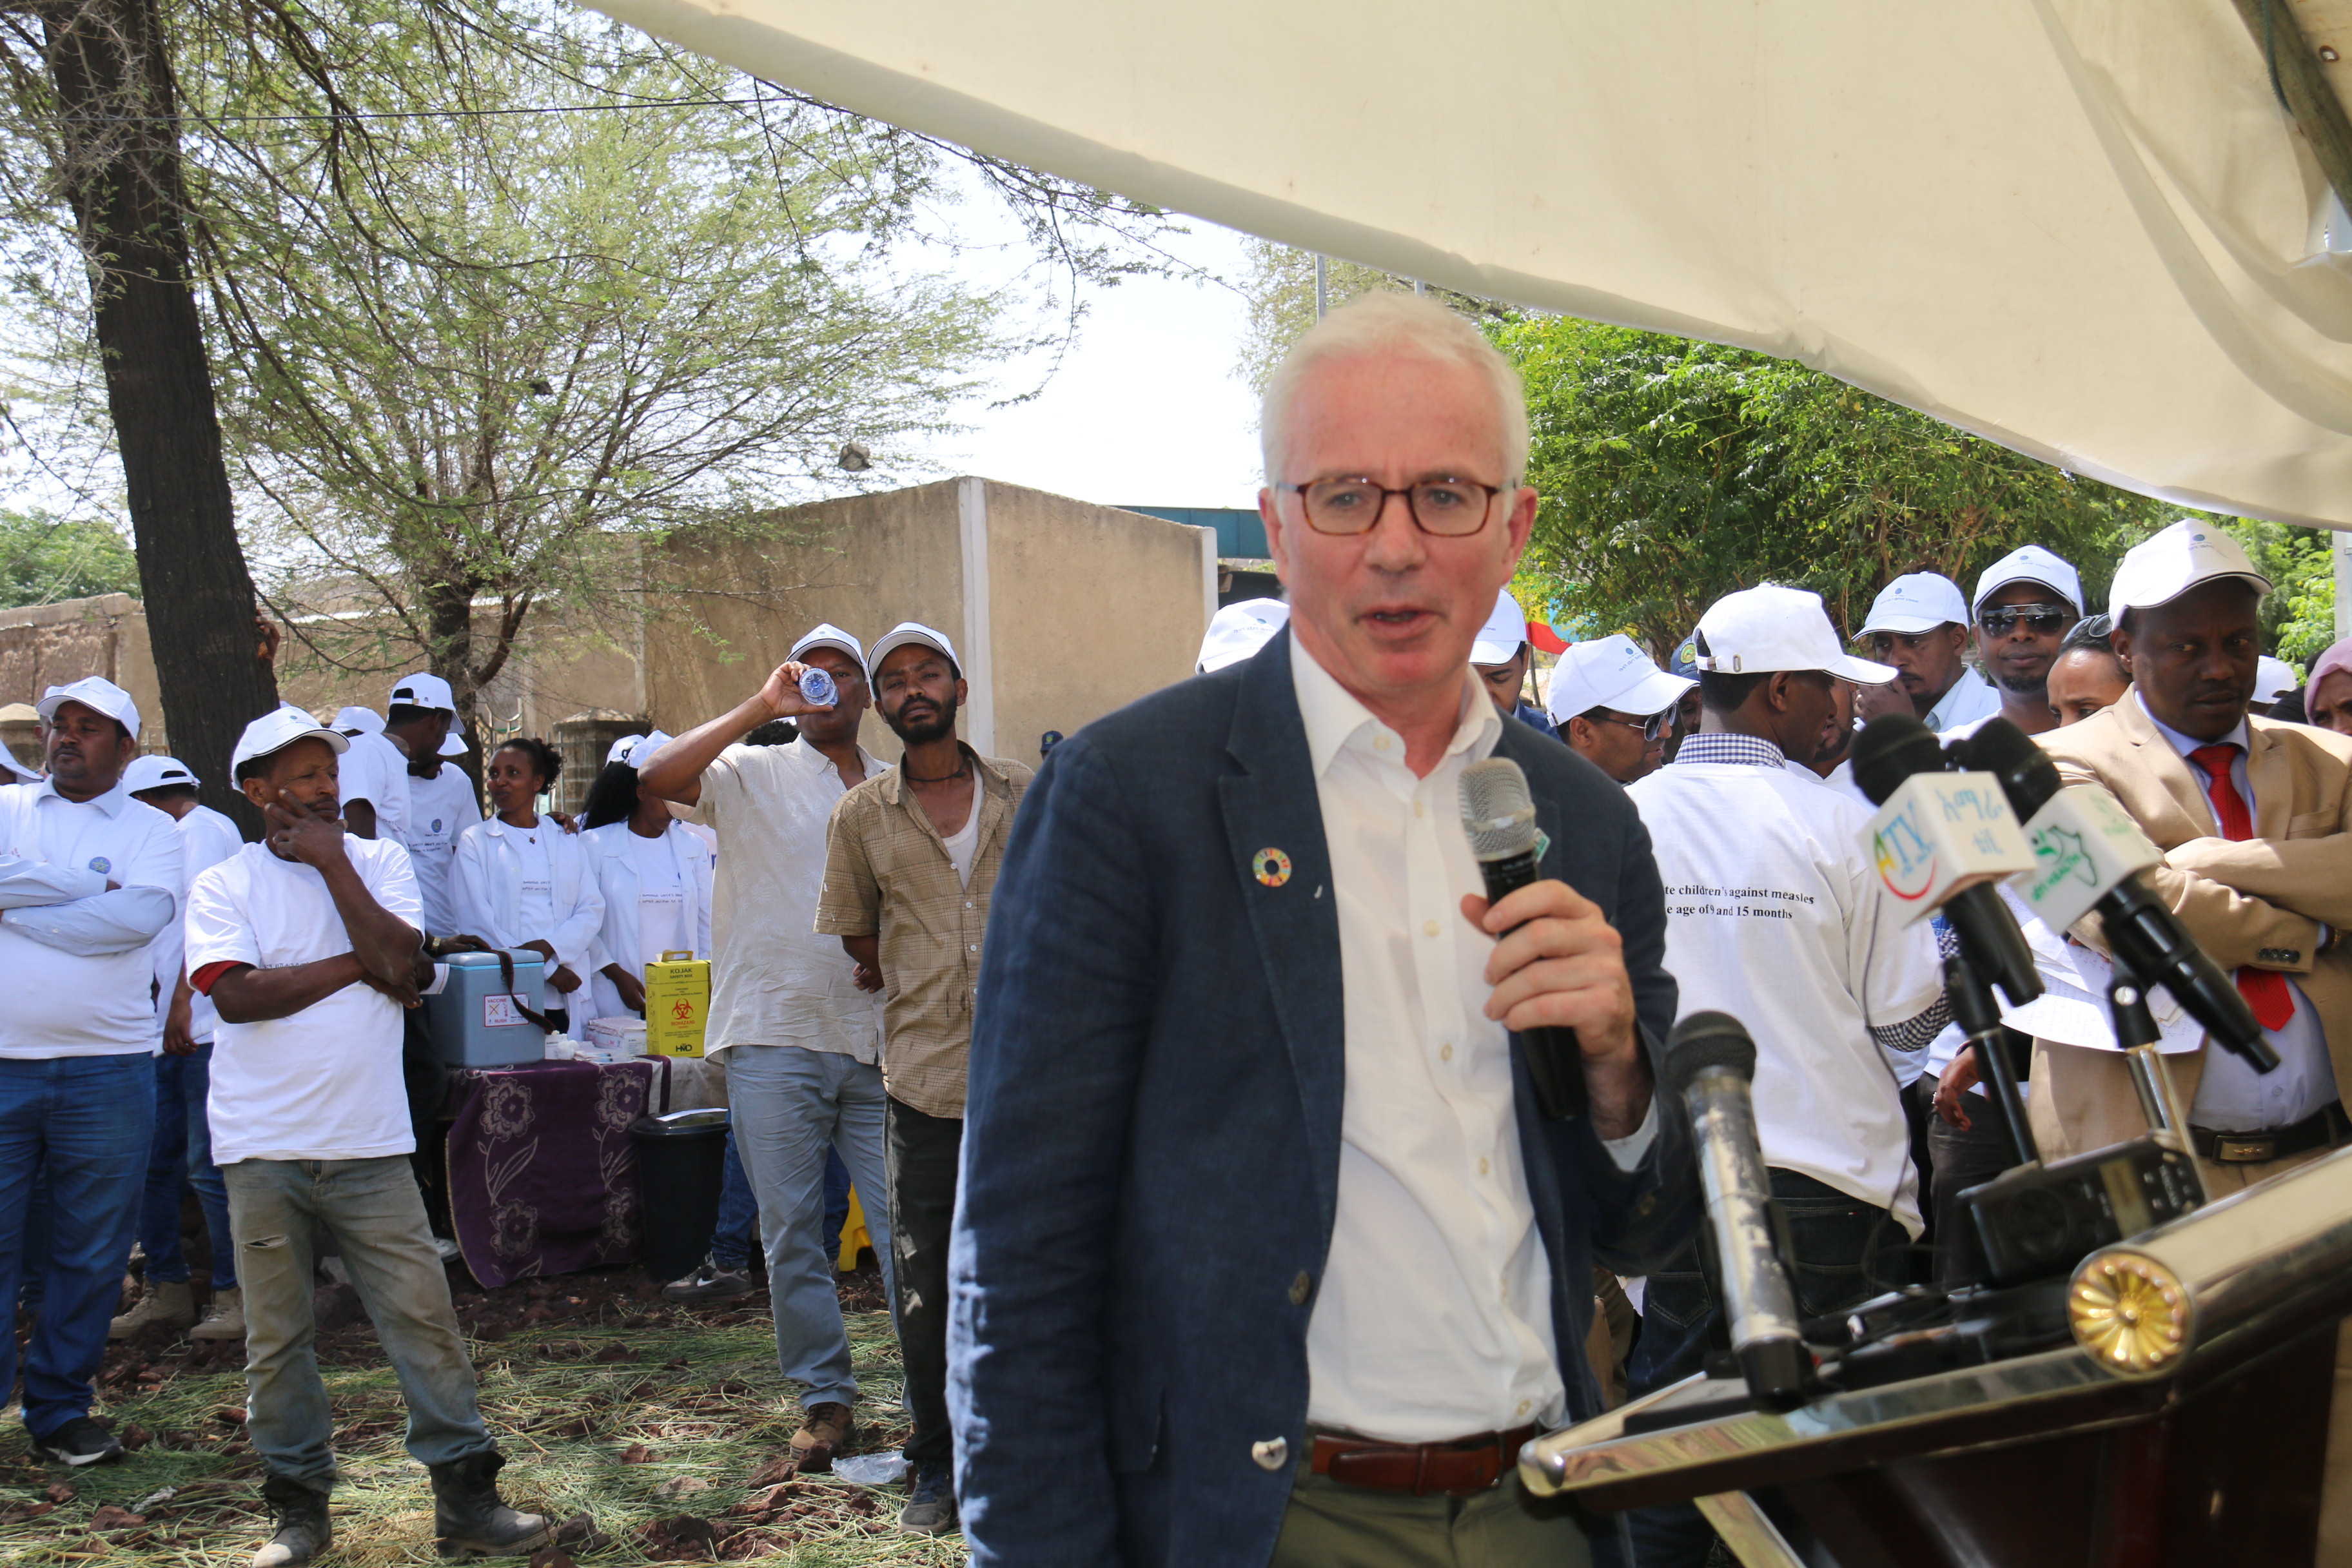 Global Fund Executive Director, Peter Sands delivering remark during the MCV2 vaccination launching in Ethiopia